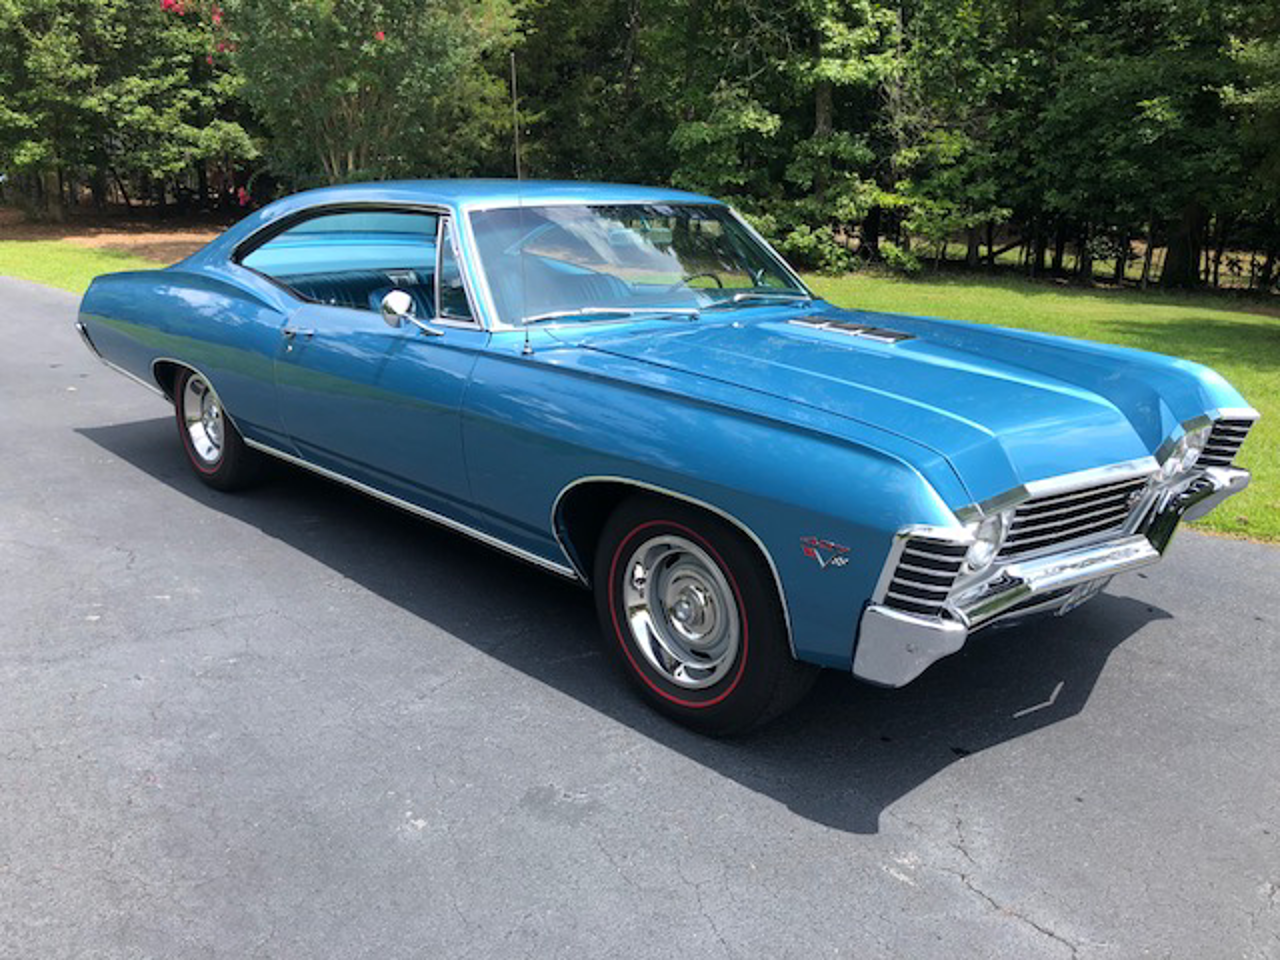 For Sale at Auction: 1967 Chevrolet Impala SS427 in.